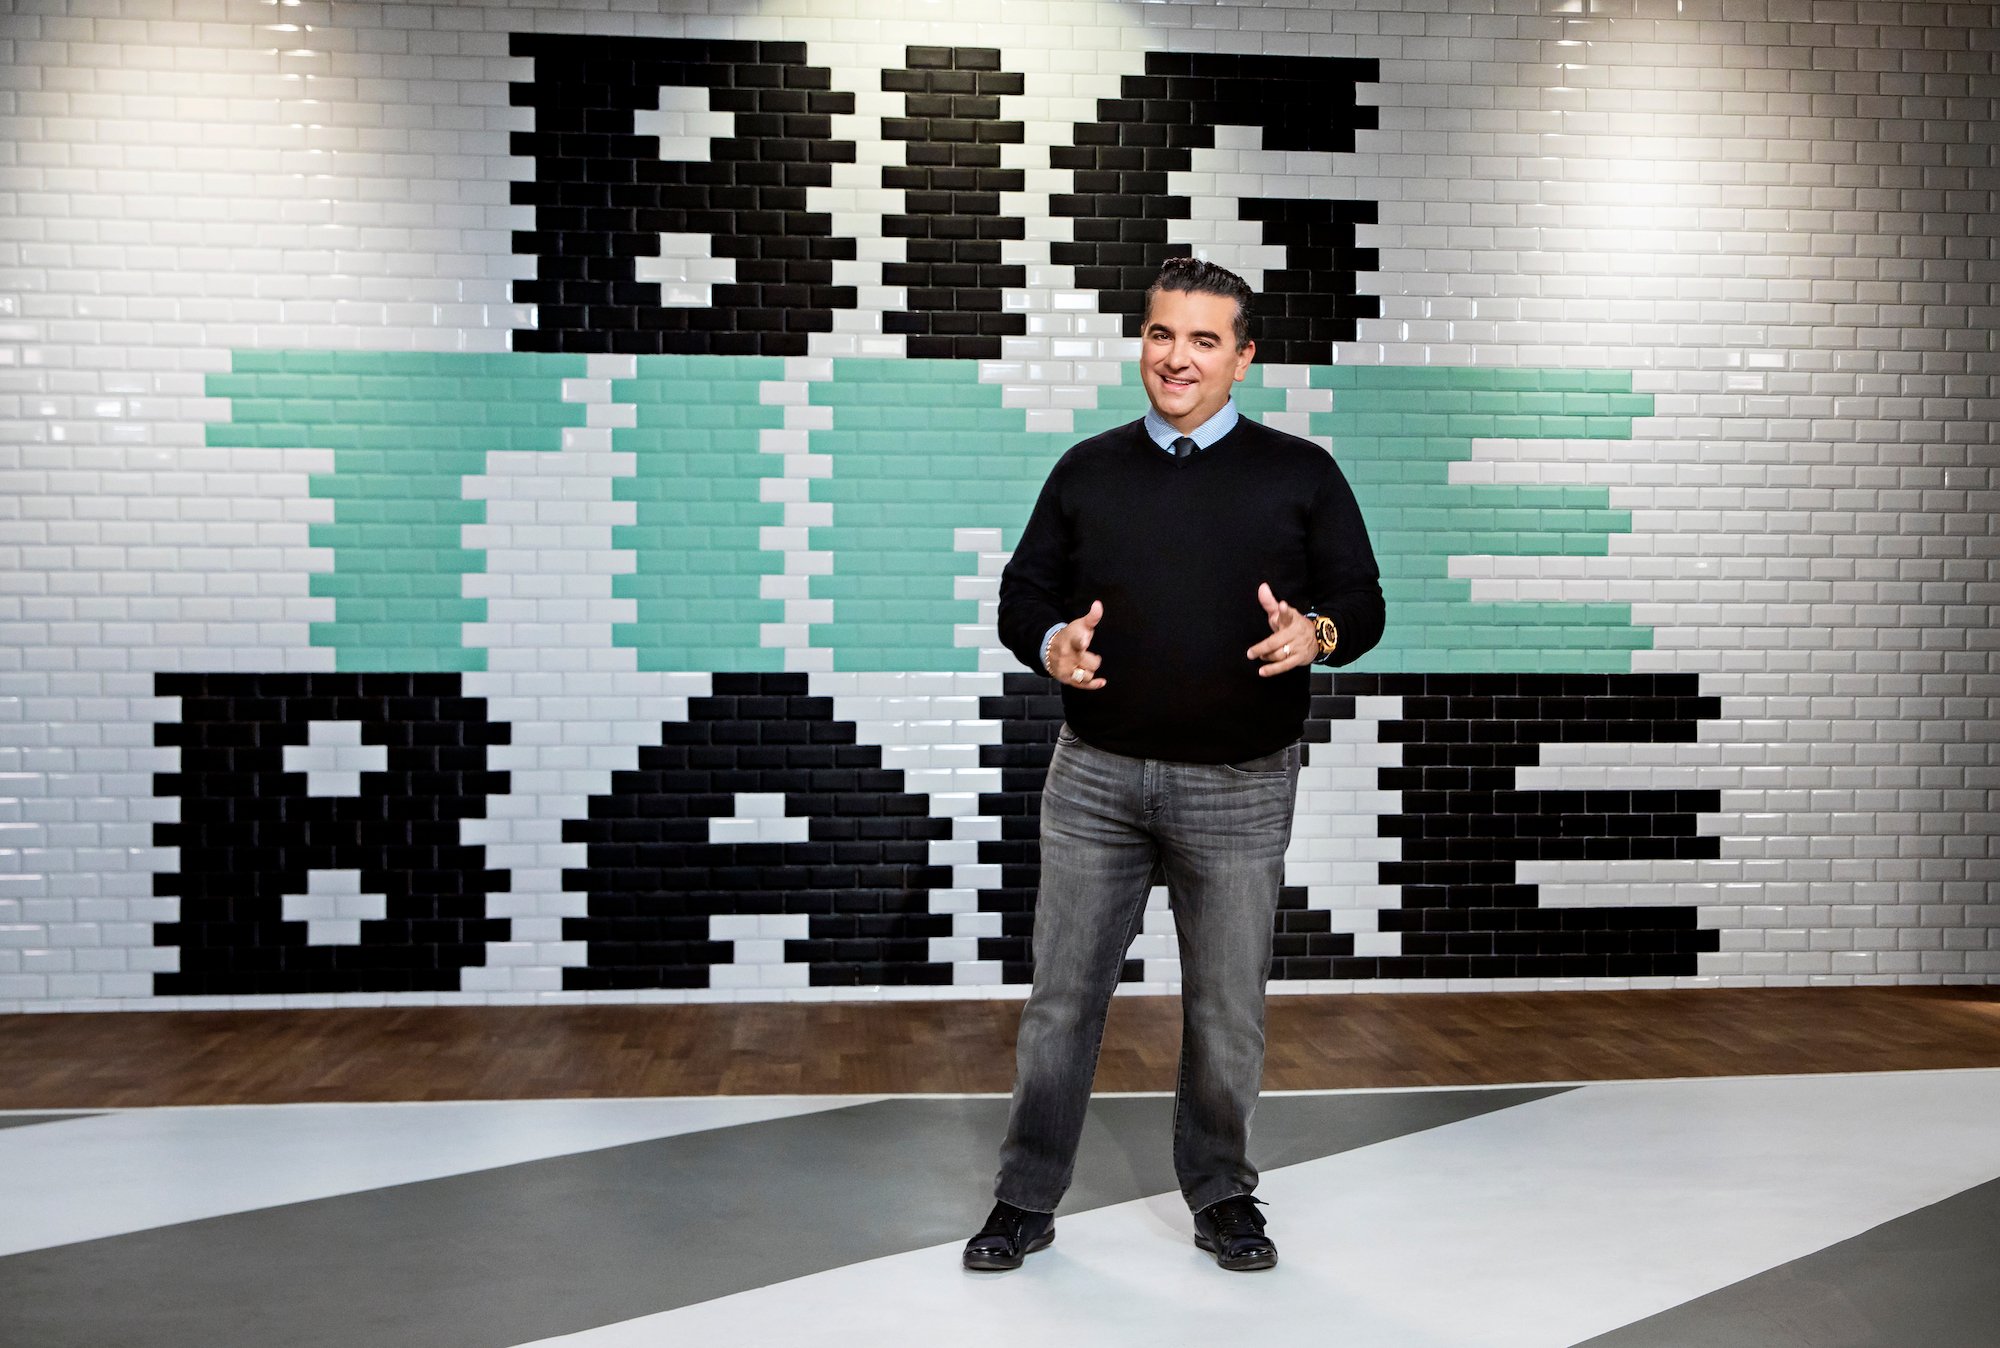 Buddy Valastro in front of a tile wall with the 'Big Time Bake' logo